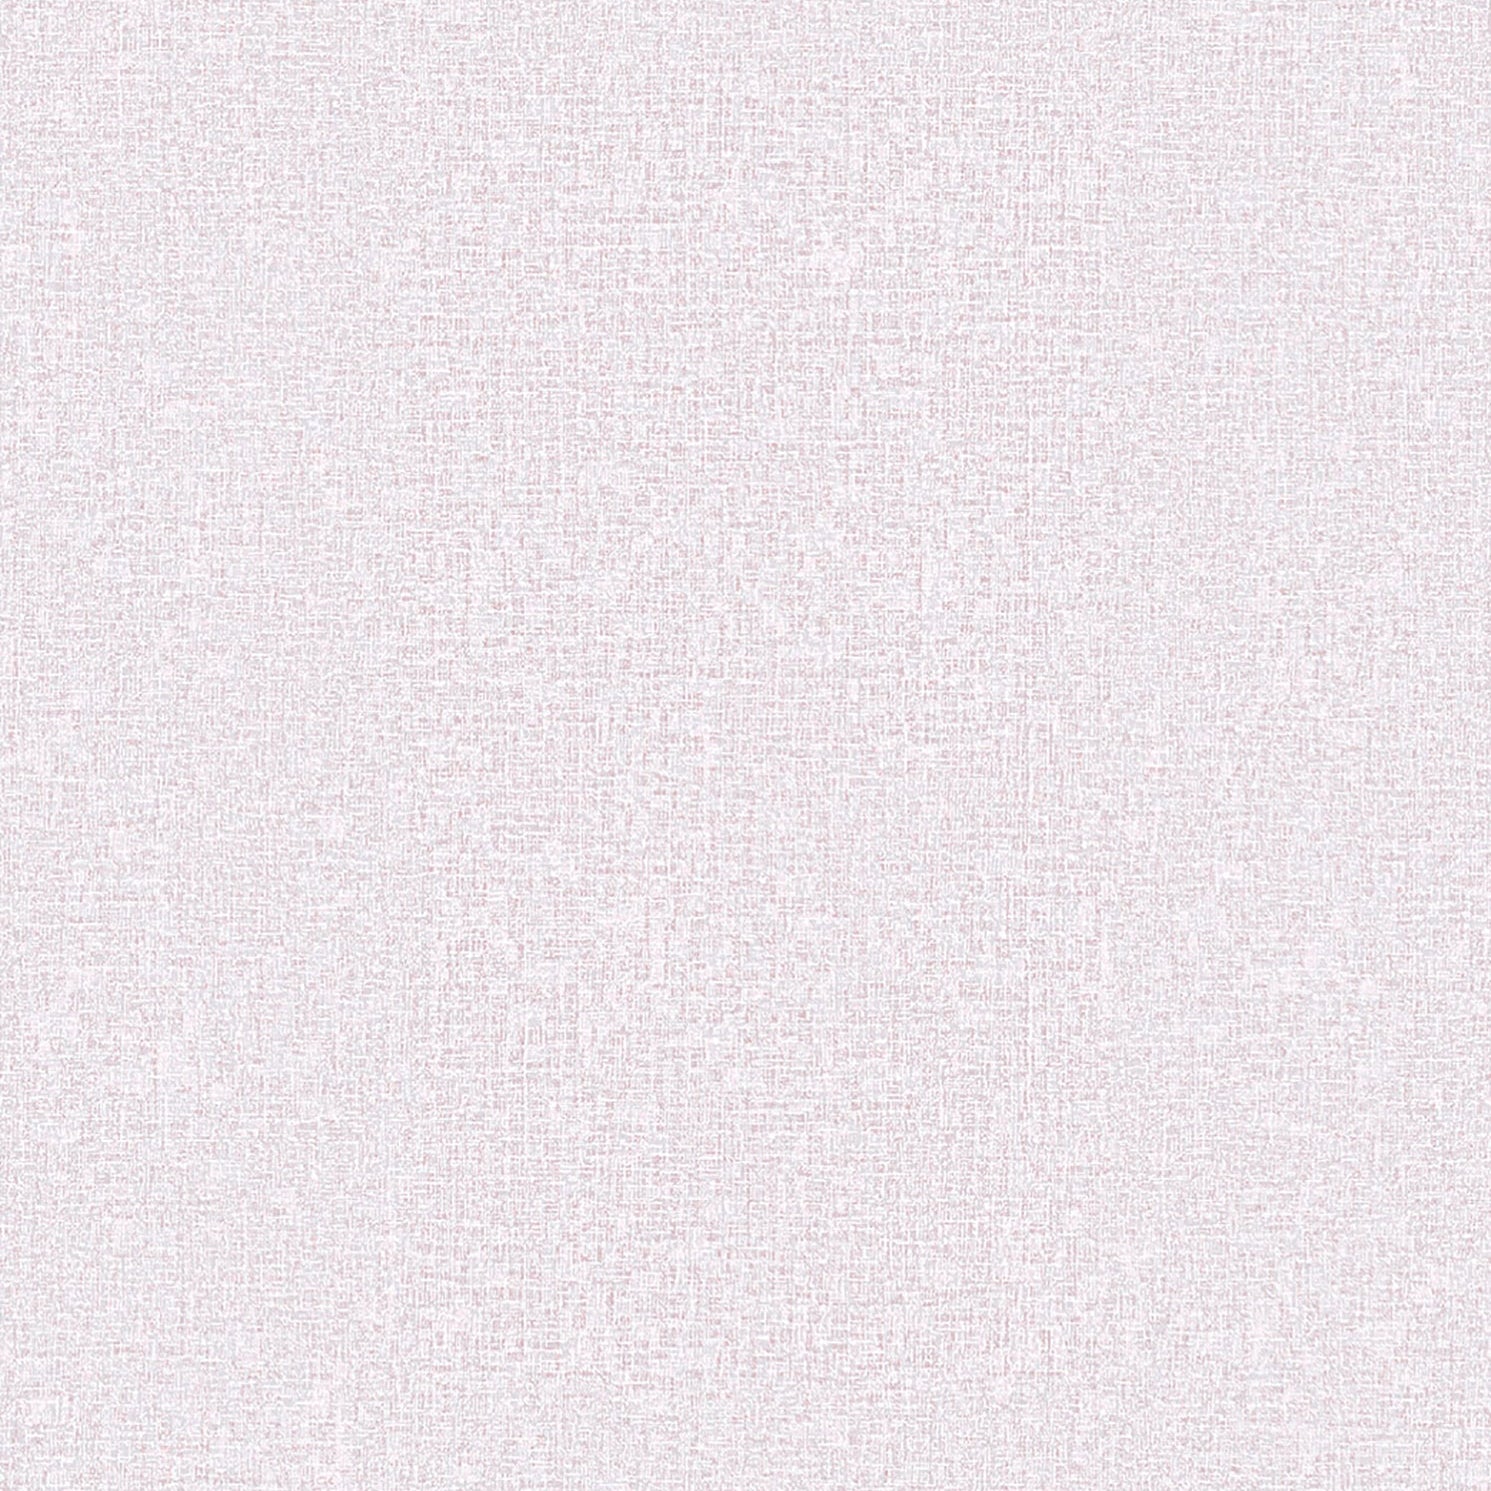 Buy 2959-AWIH-2234 Textural Essentials Nora Pink Woven Texture Pink Brewster Wallpaper